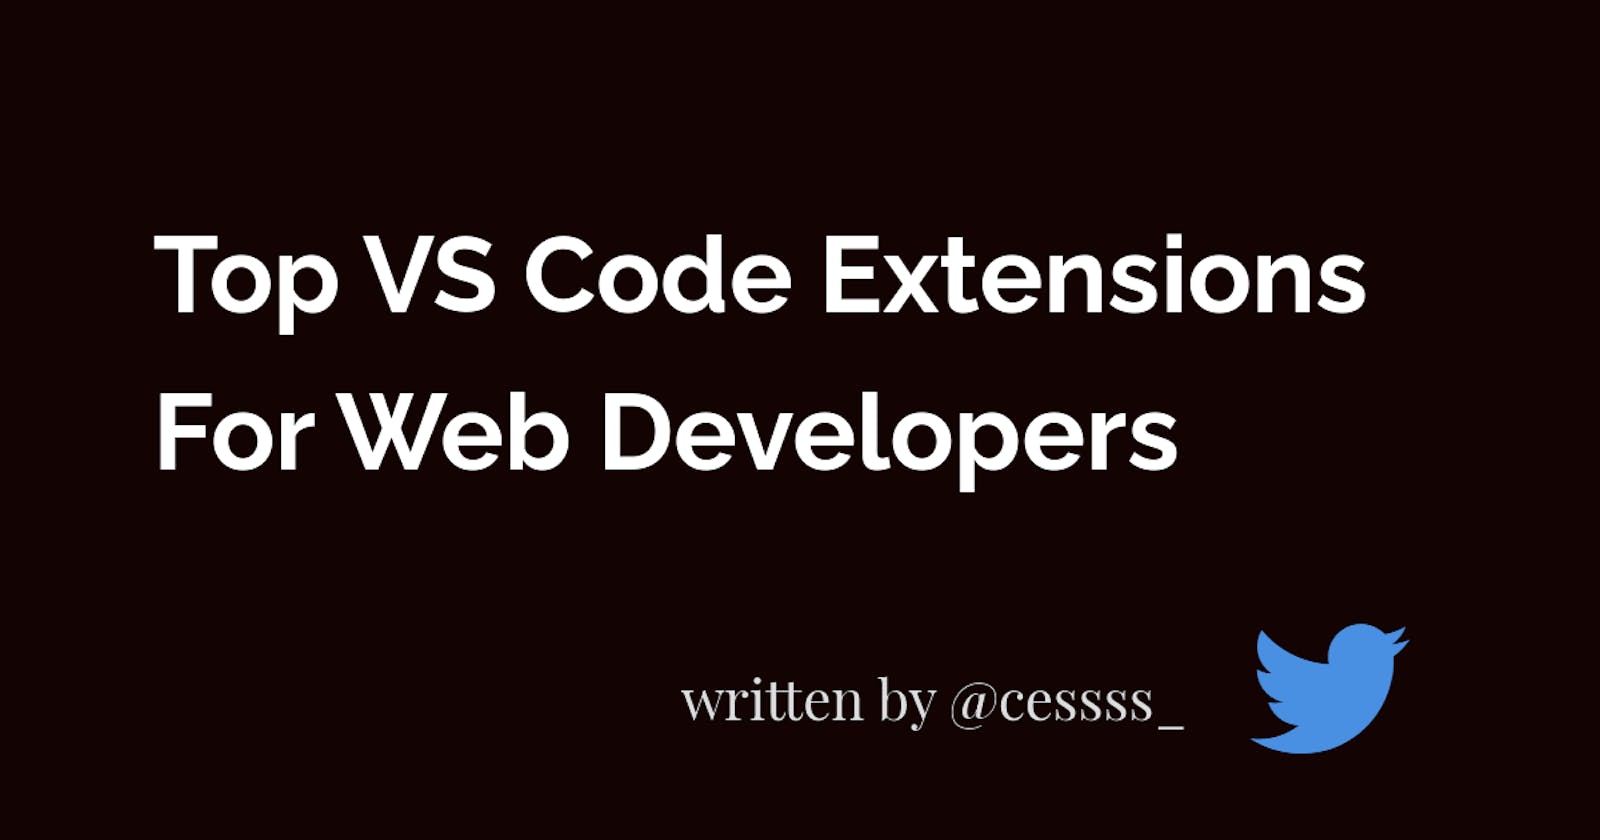 Top VS Code Extensions For Web Developers